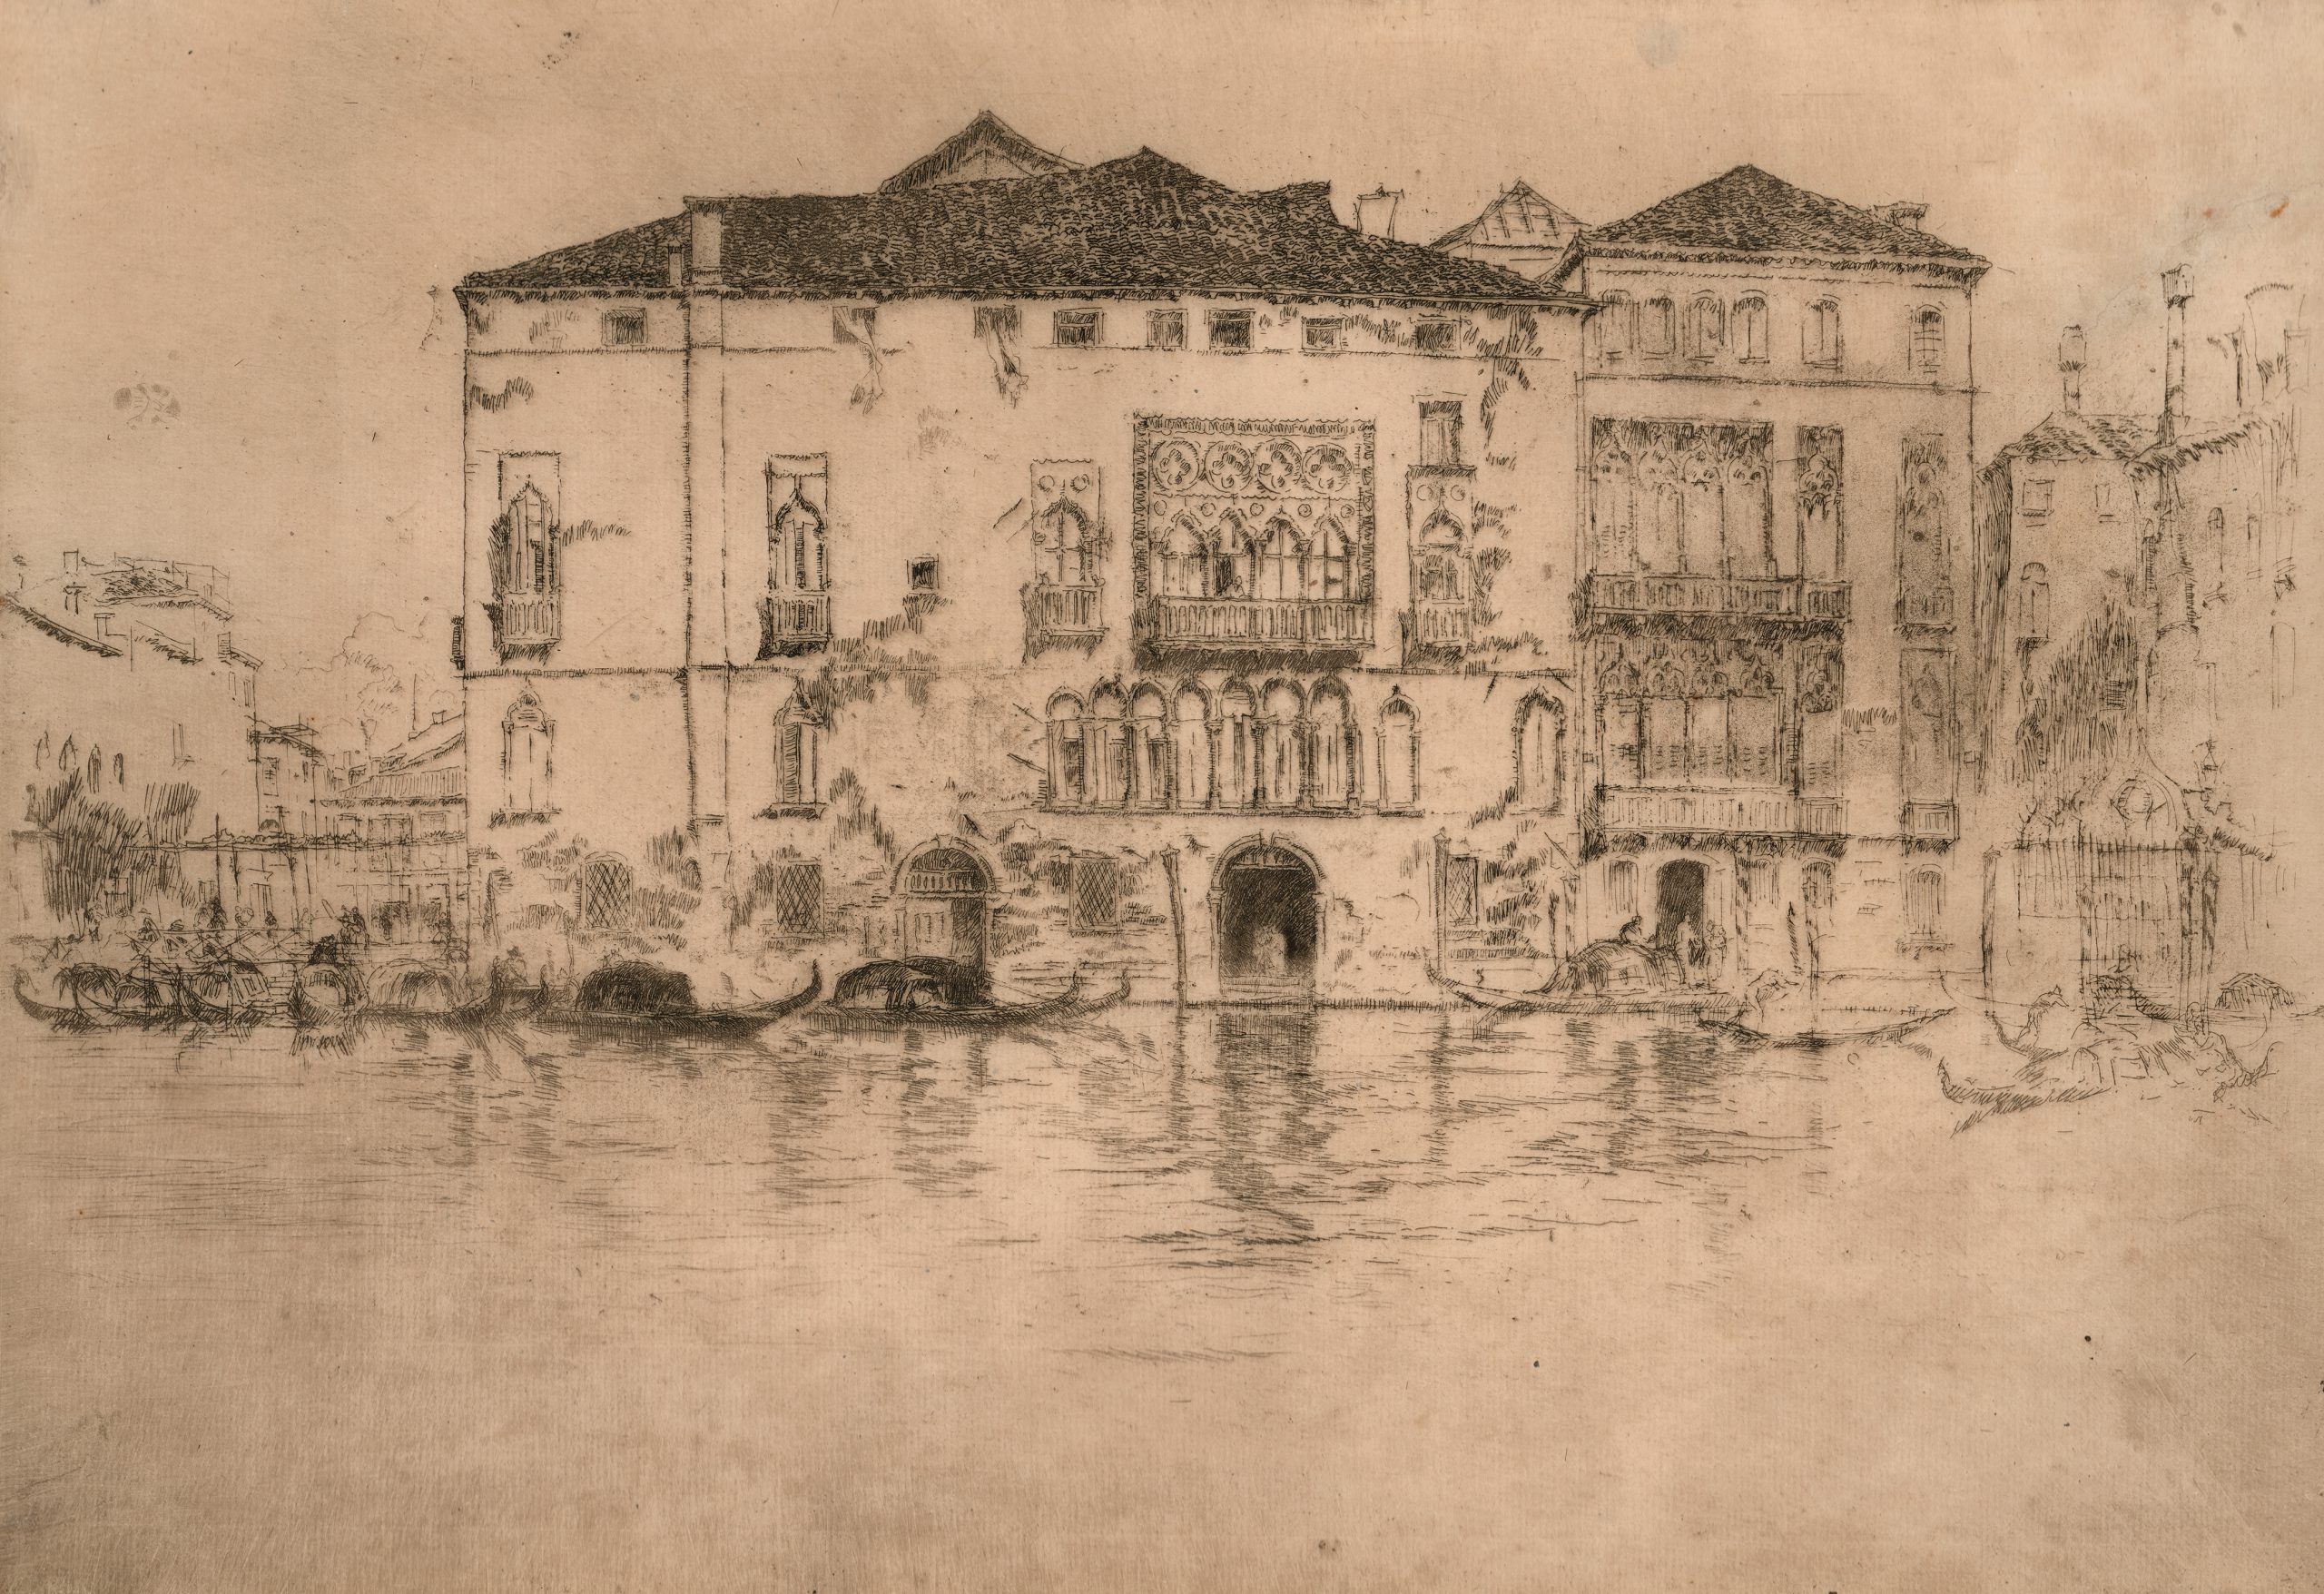 An etching and drypoint by Whistler of The Palaces on the water in Venice.